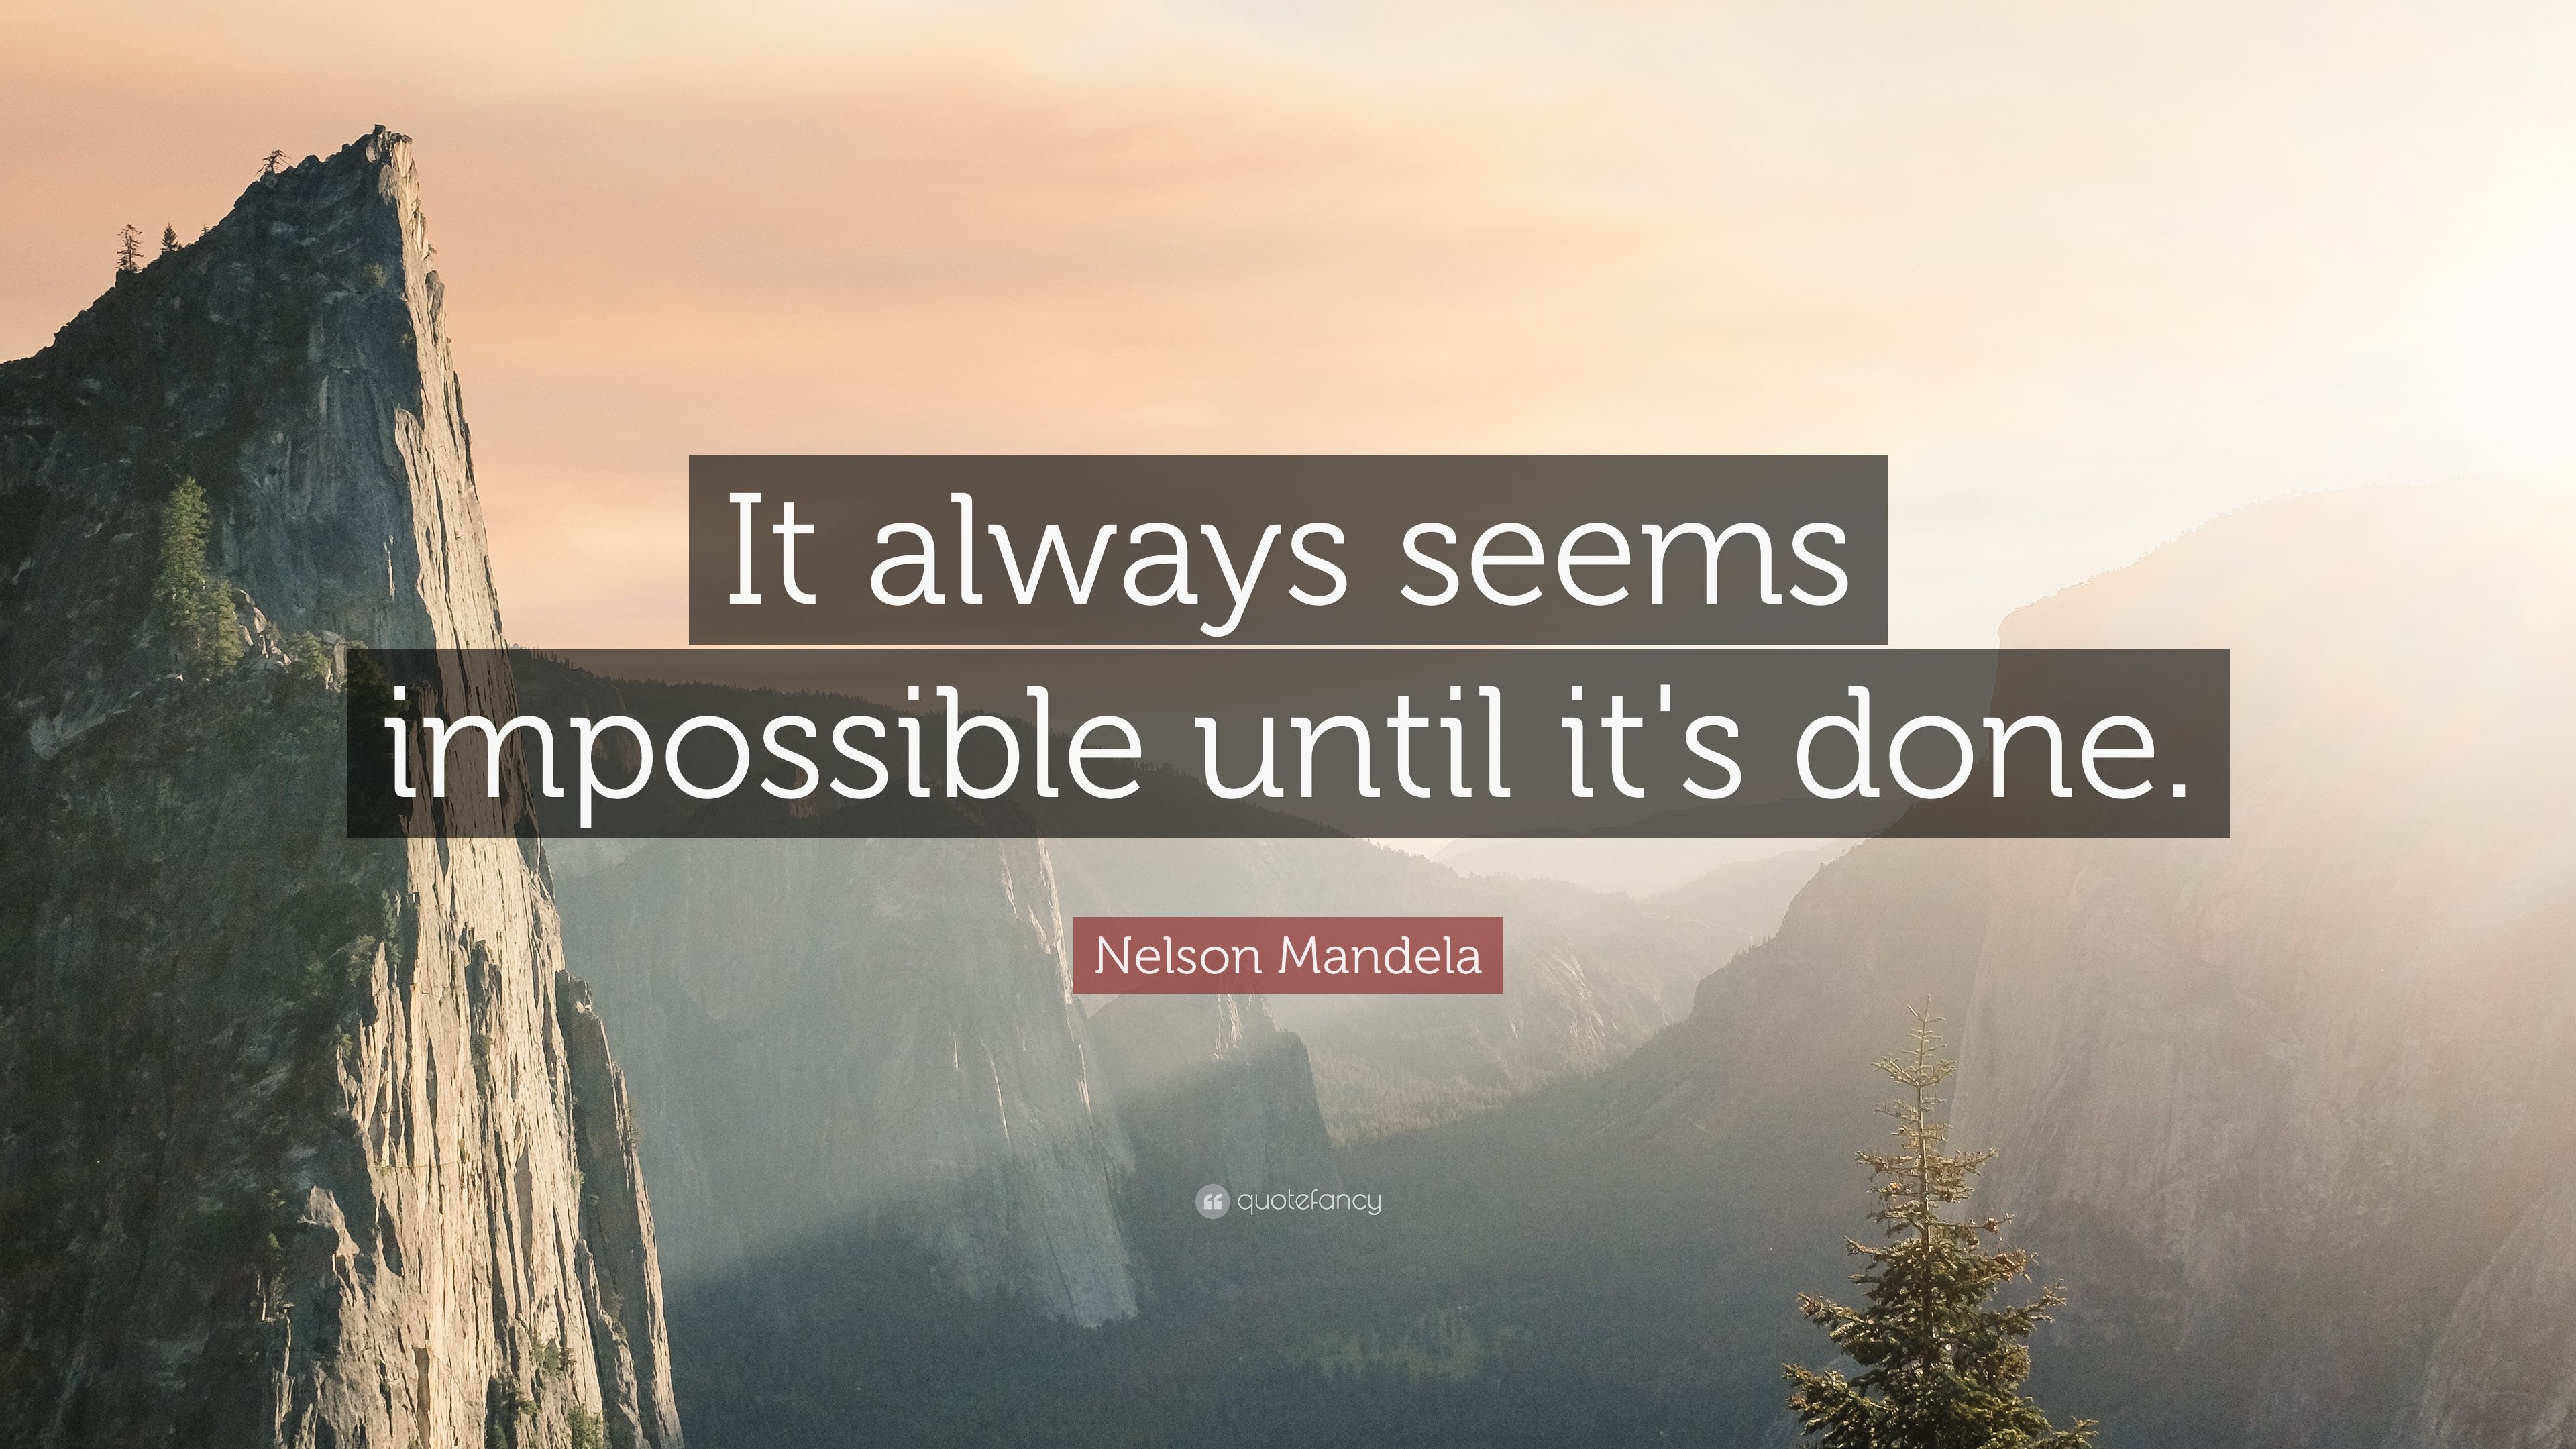 Nelson Mandela Quote: “It always seems impossible until it's done